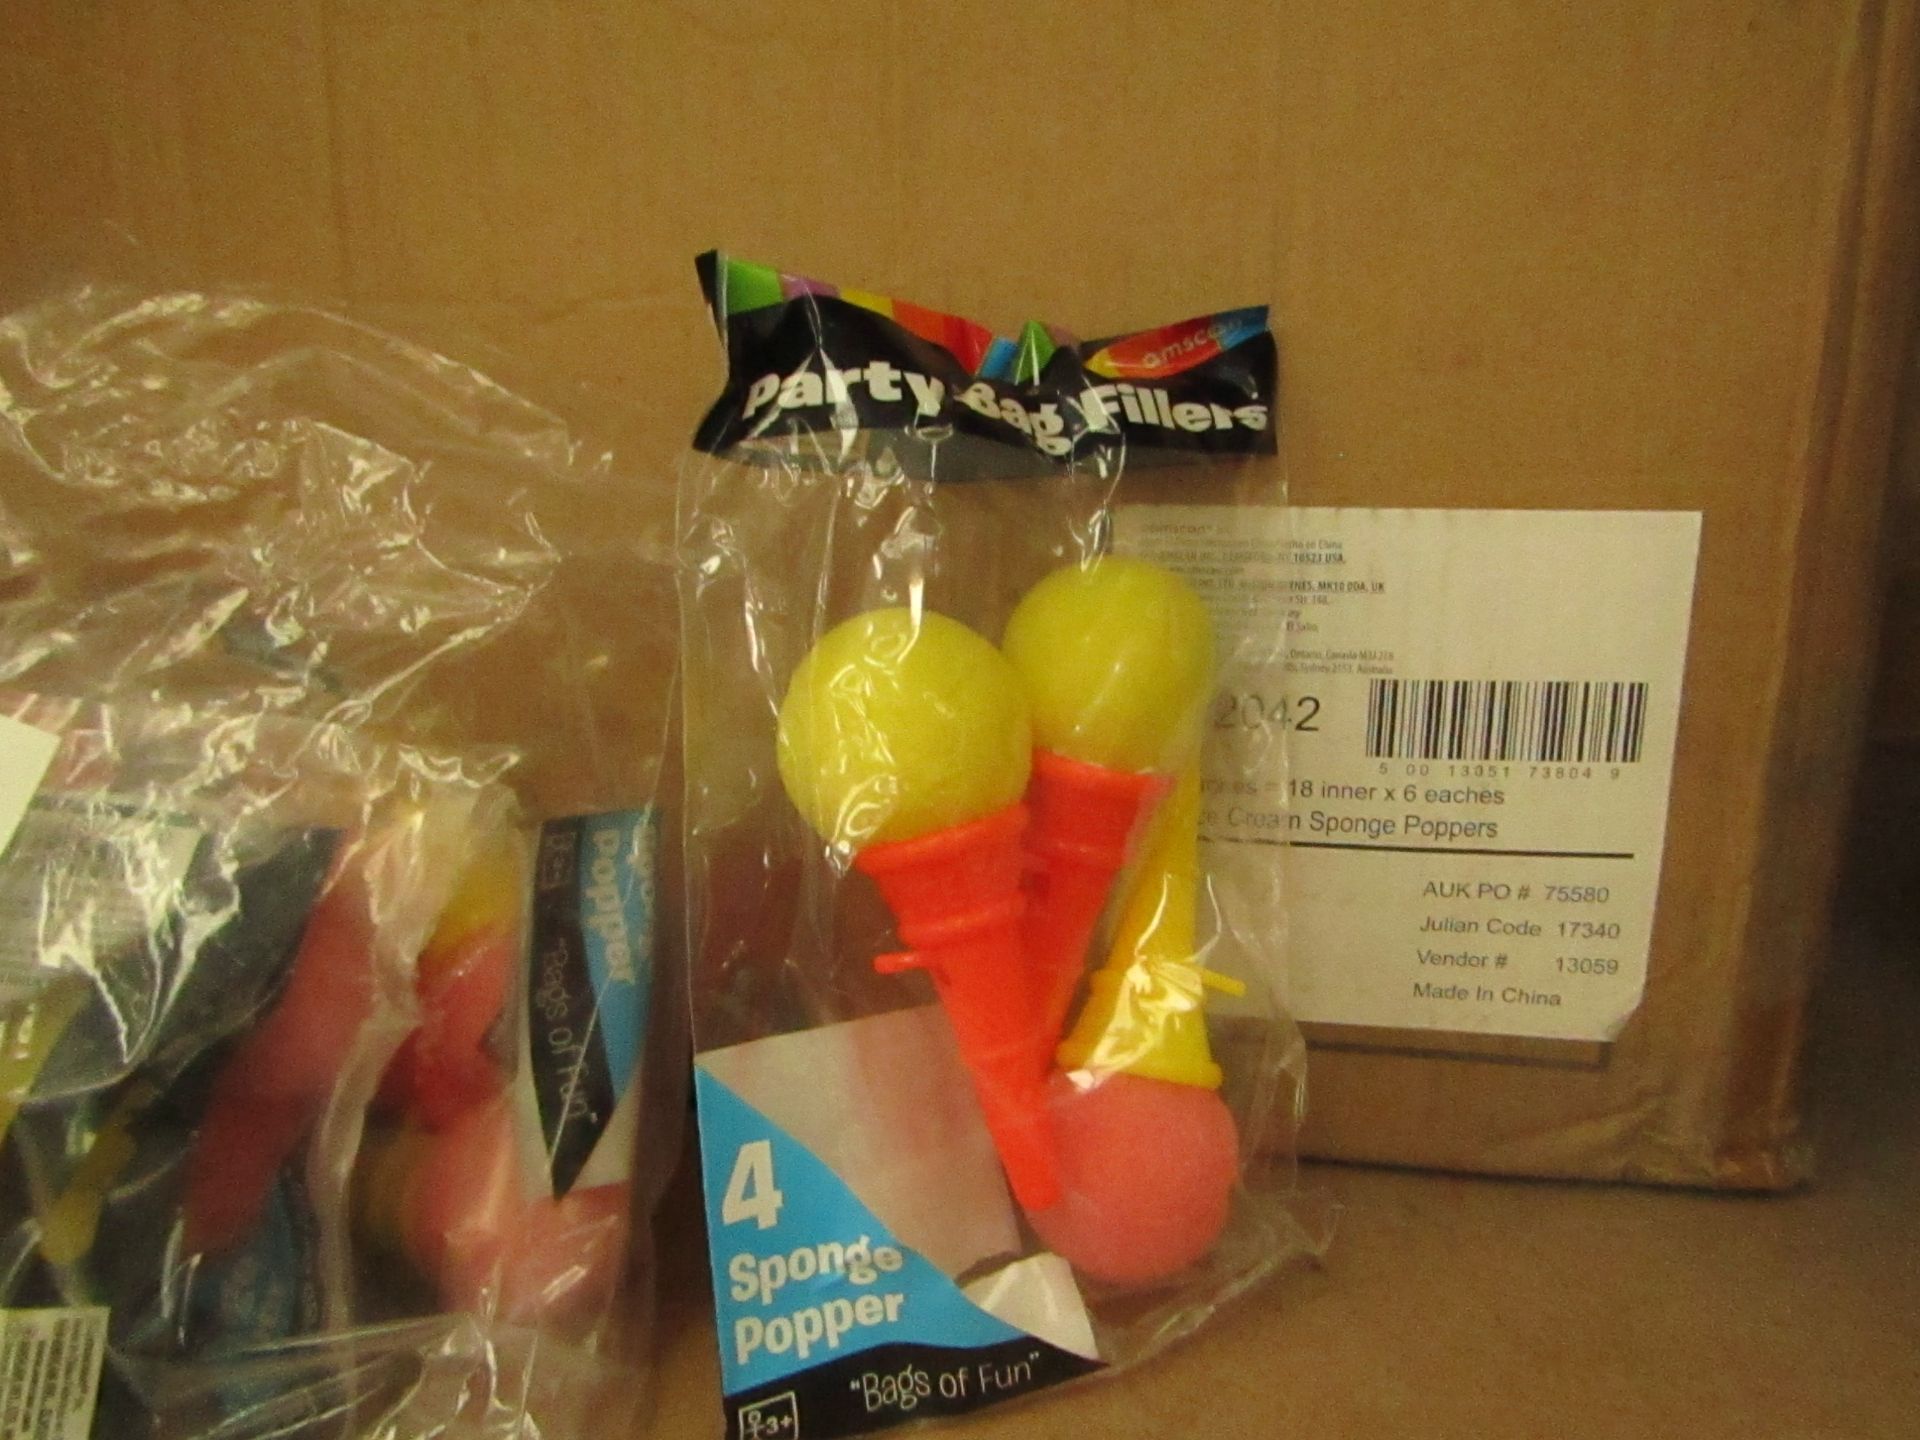 Box Containing Approx 50+ Mini Party Bag Fillers (Ice Cream Poppers) - All Unused & Packaged.